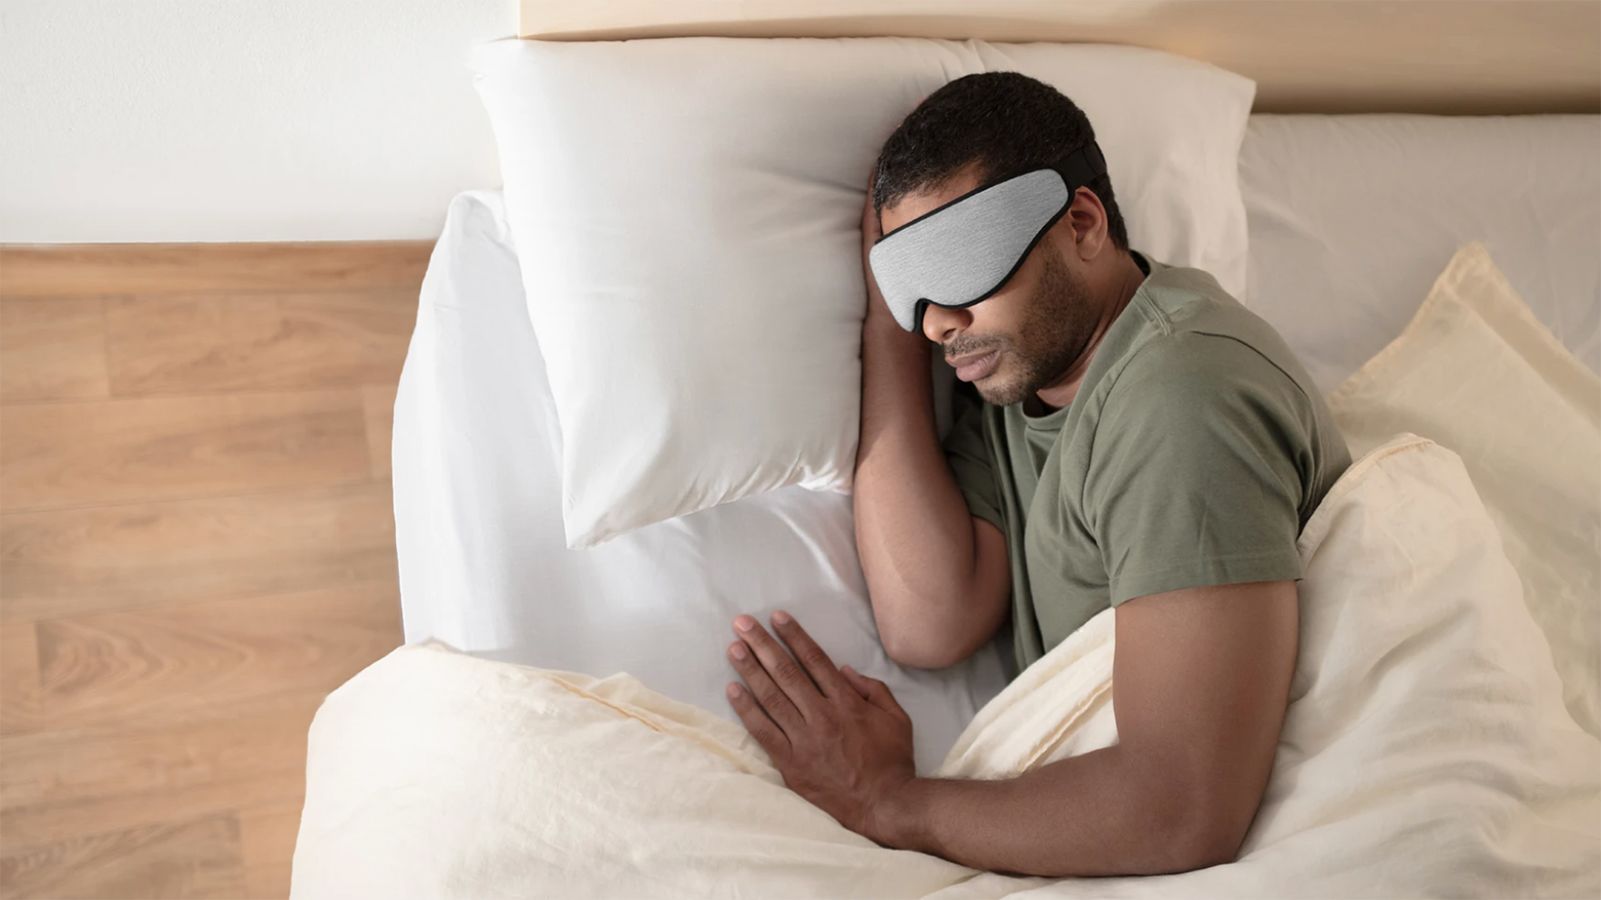 Sleep in total darkness (and comfort) with Ostrichpillow’s new sleep mask | CNN